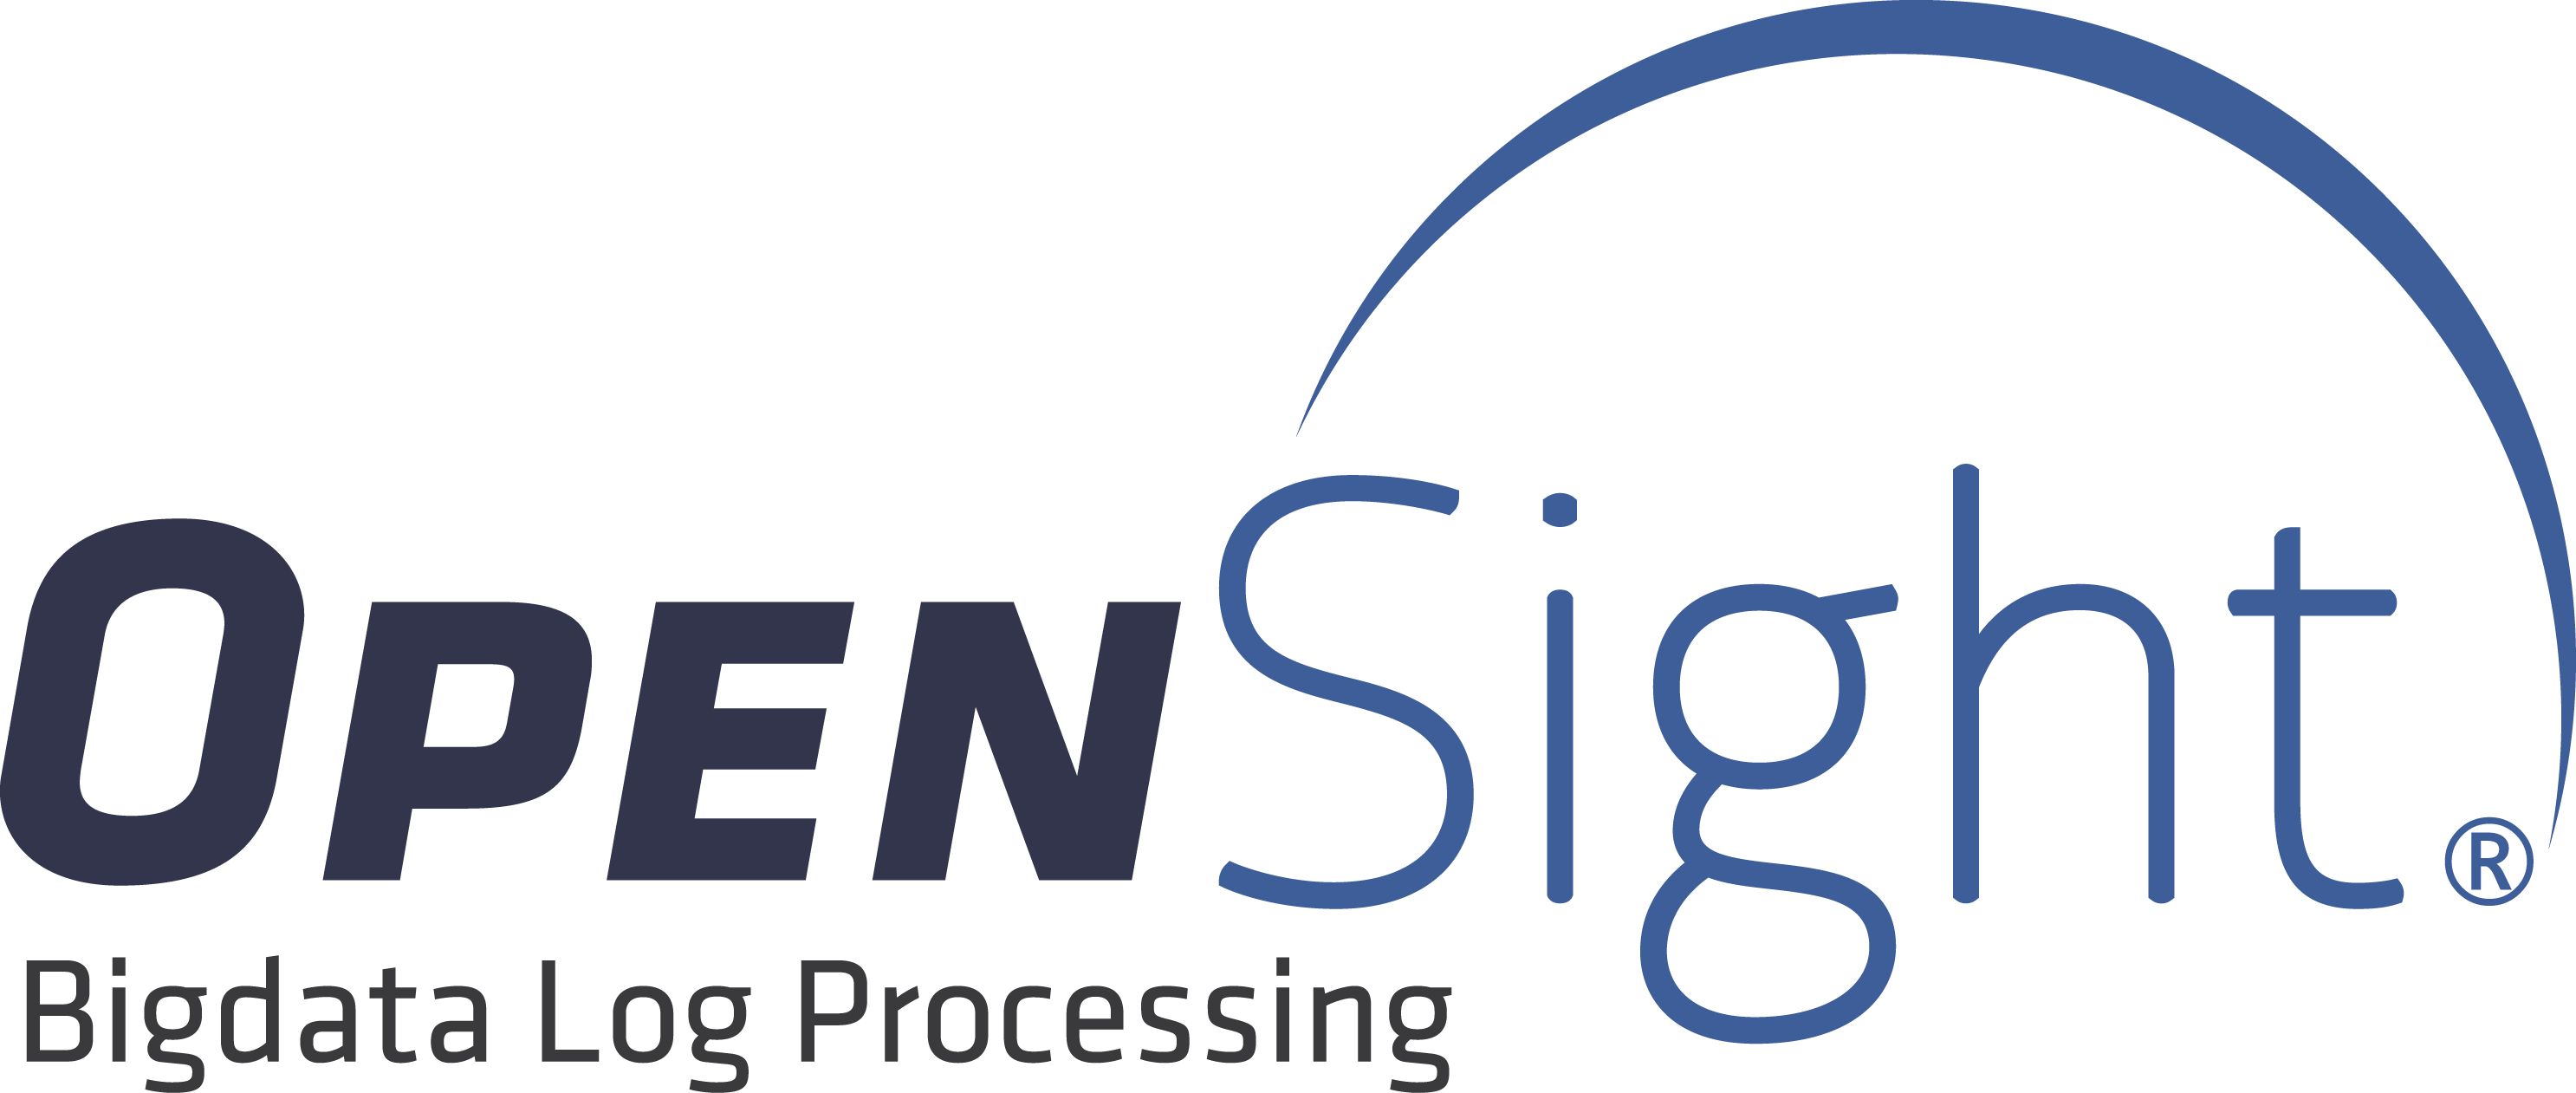 OpenSight IMAGE